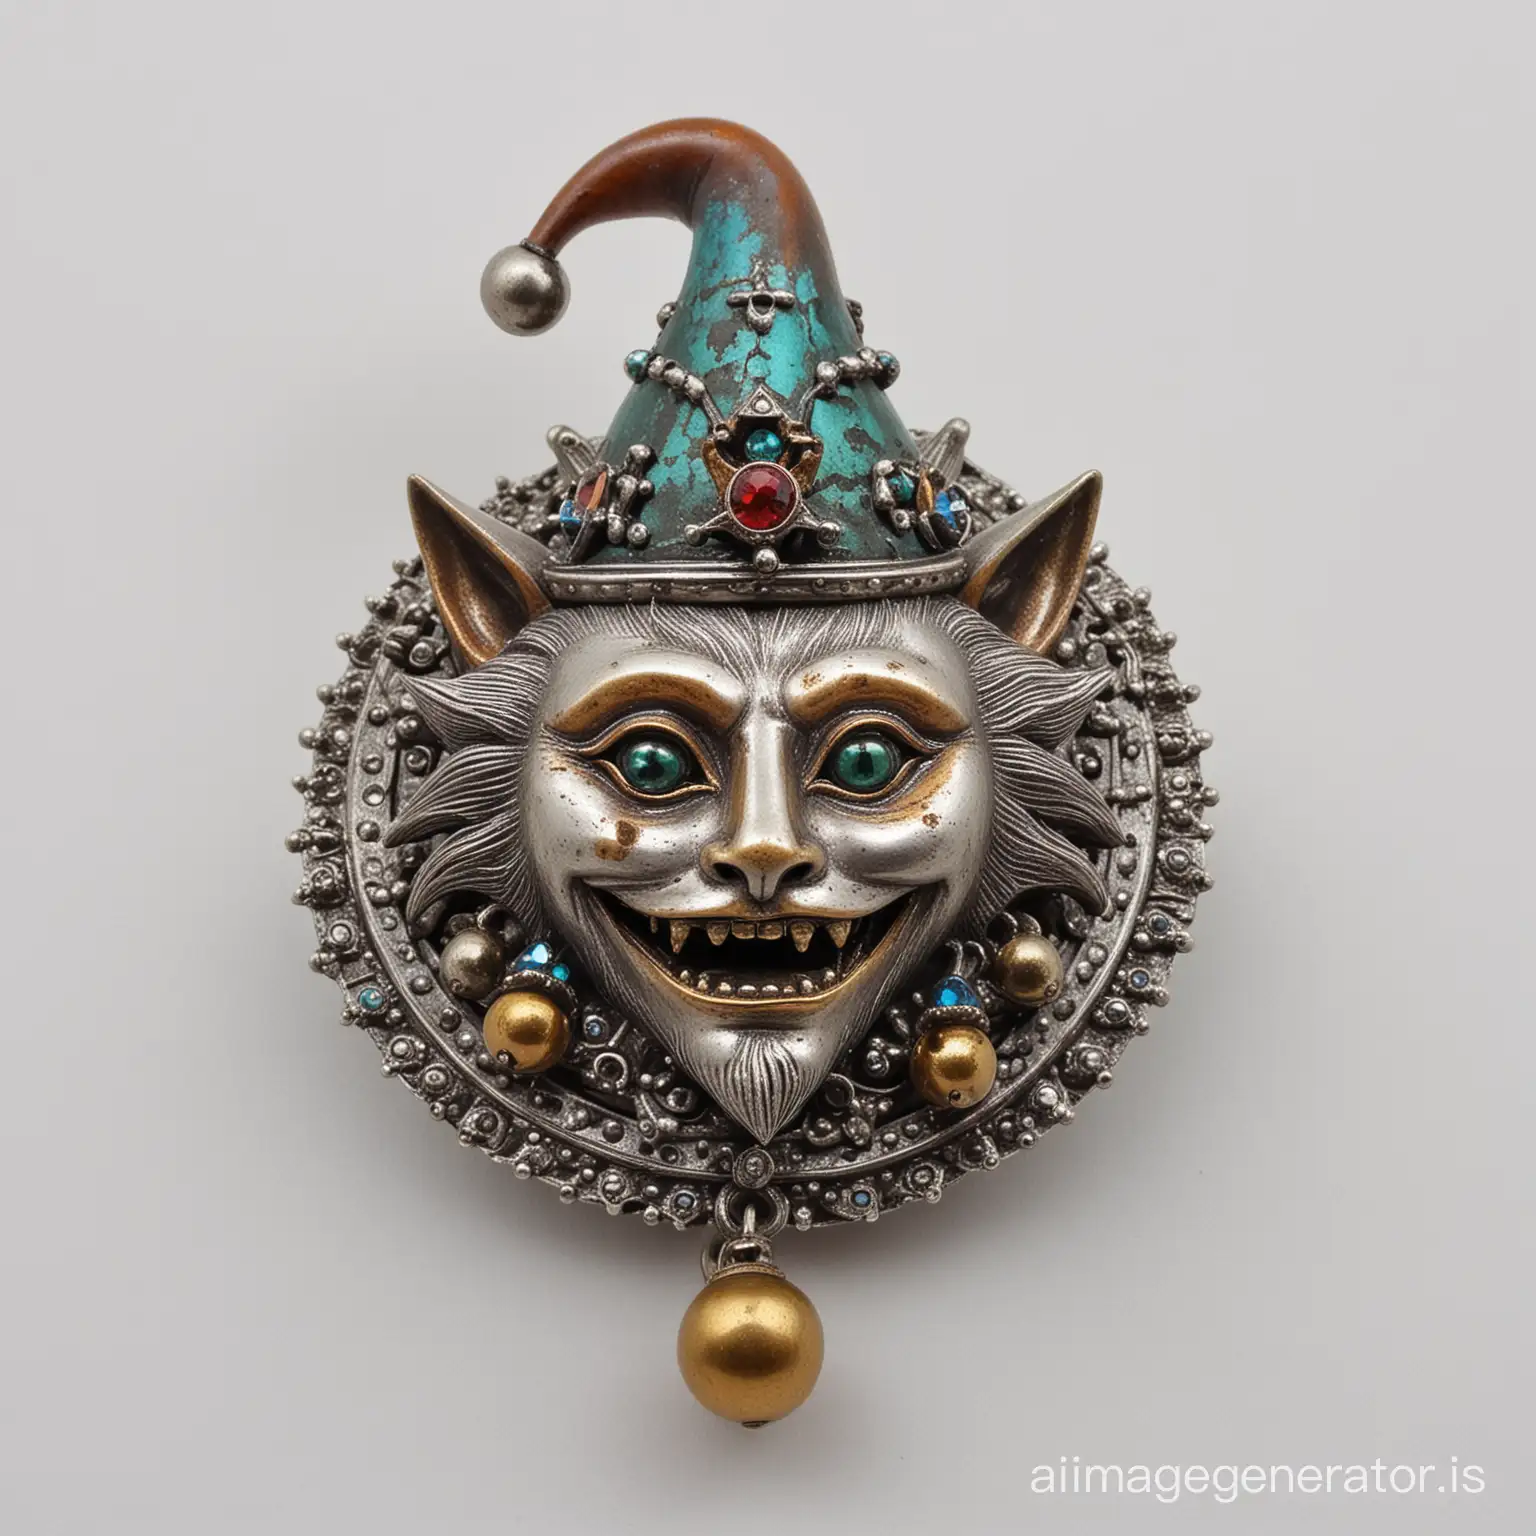 Medieval-Brooch-with-Jester-Cat-Design-in-Patinated-Silver-and-Bronze